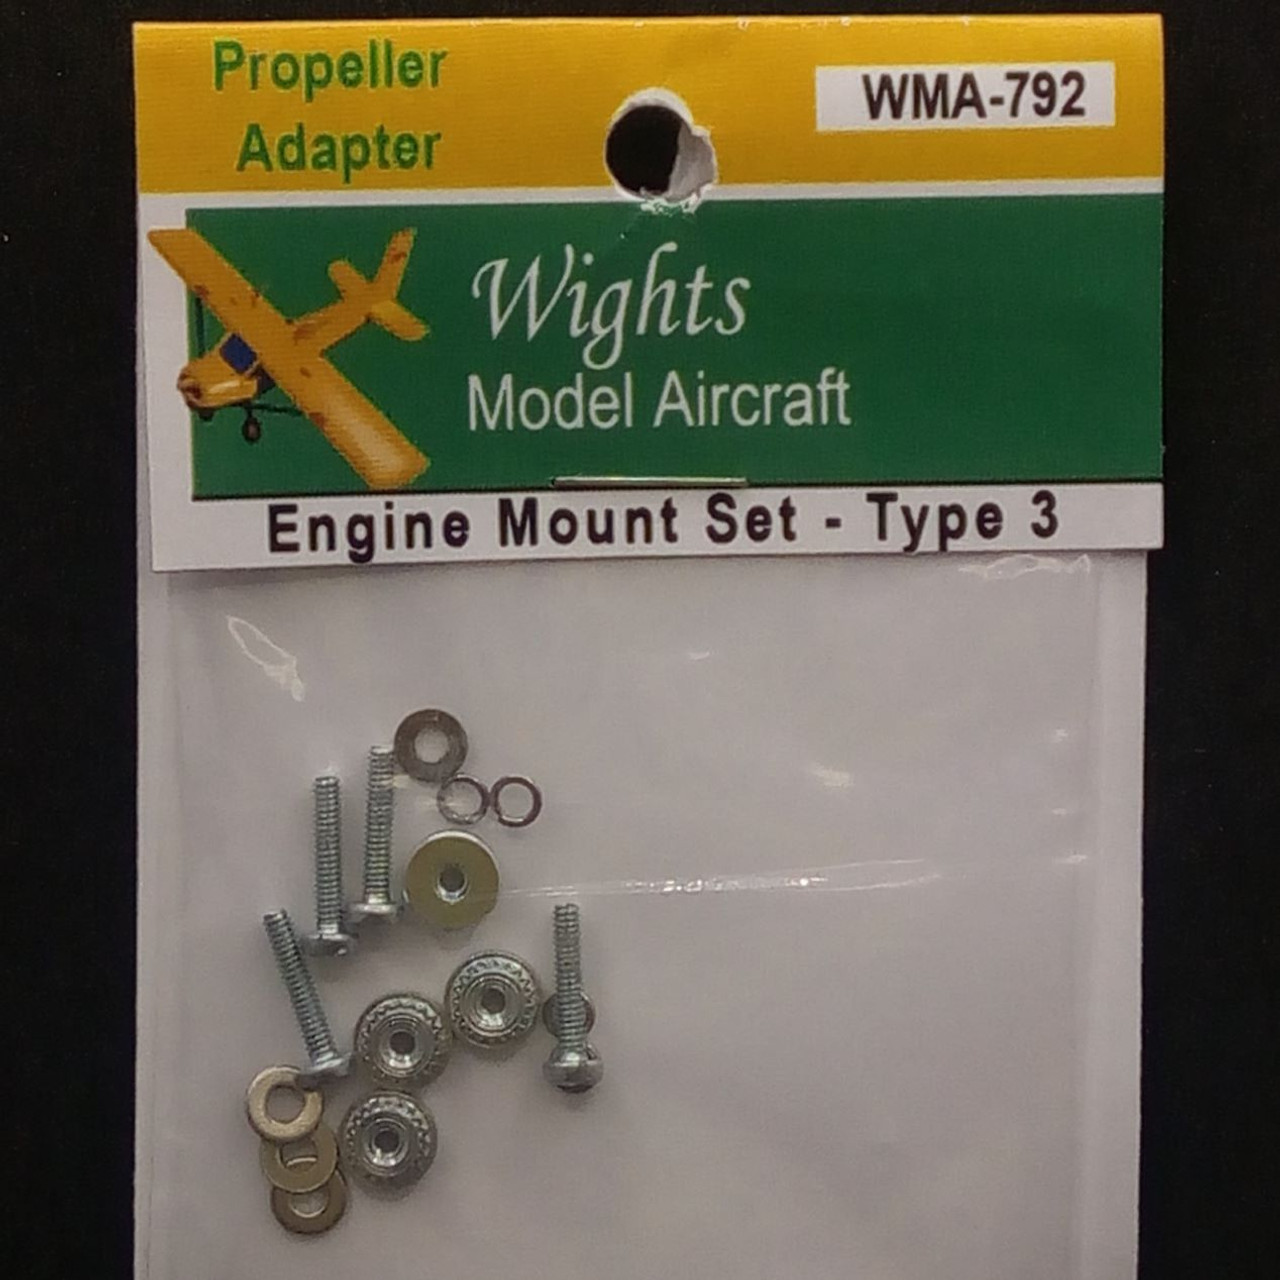 Engine Mount Set - For Cox 049 Engines - Type 3 (WMA-792)